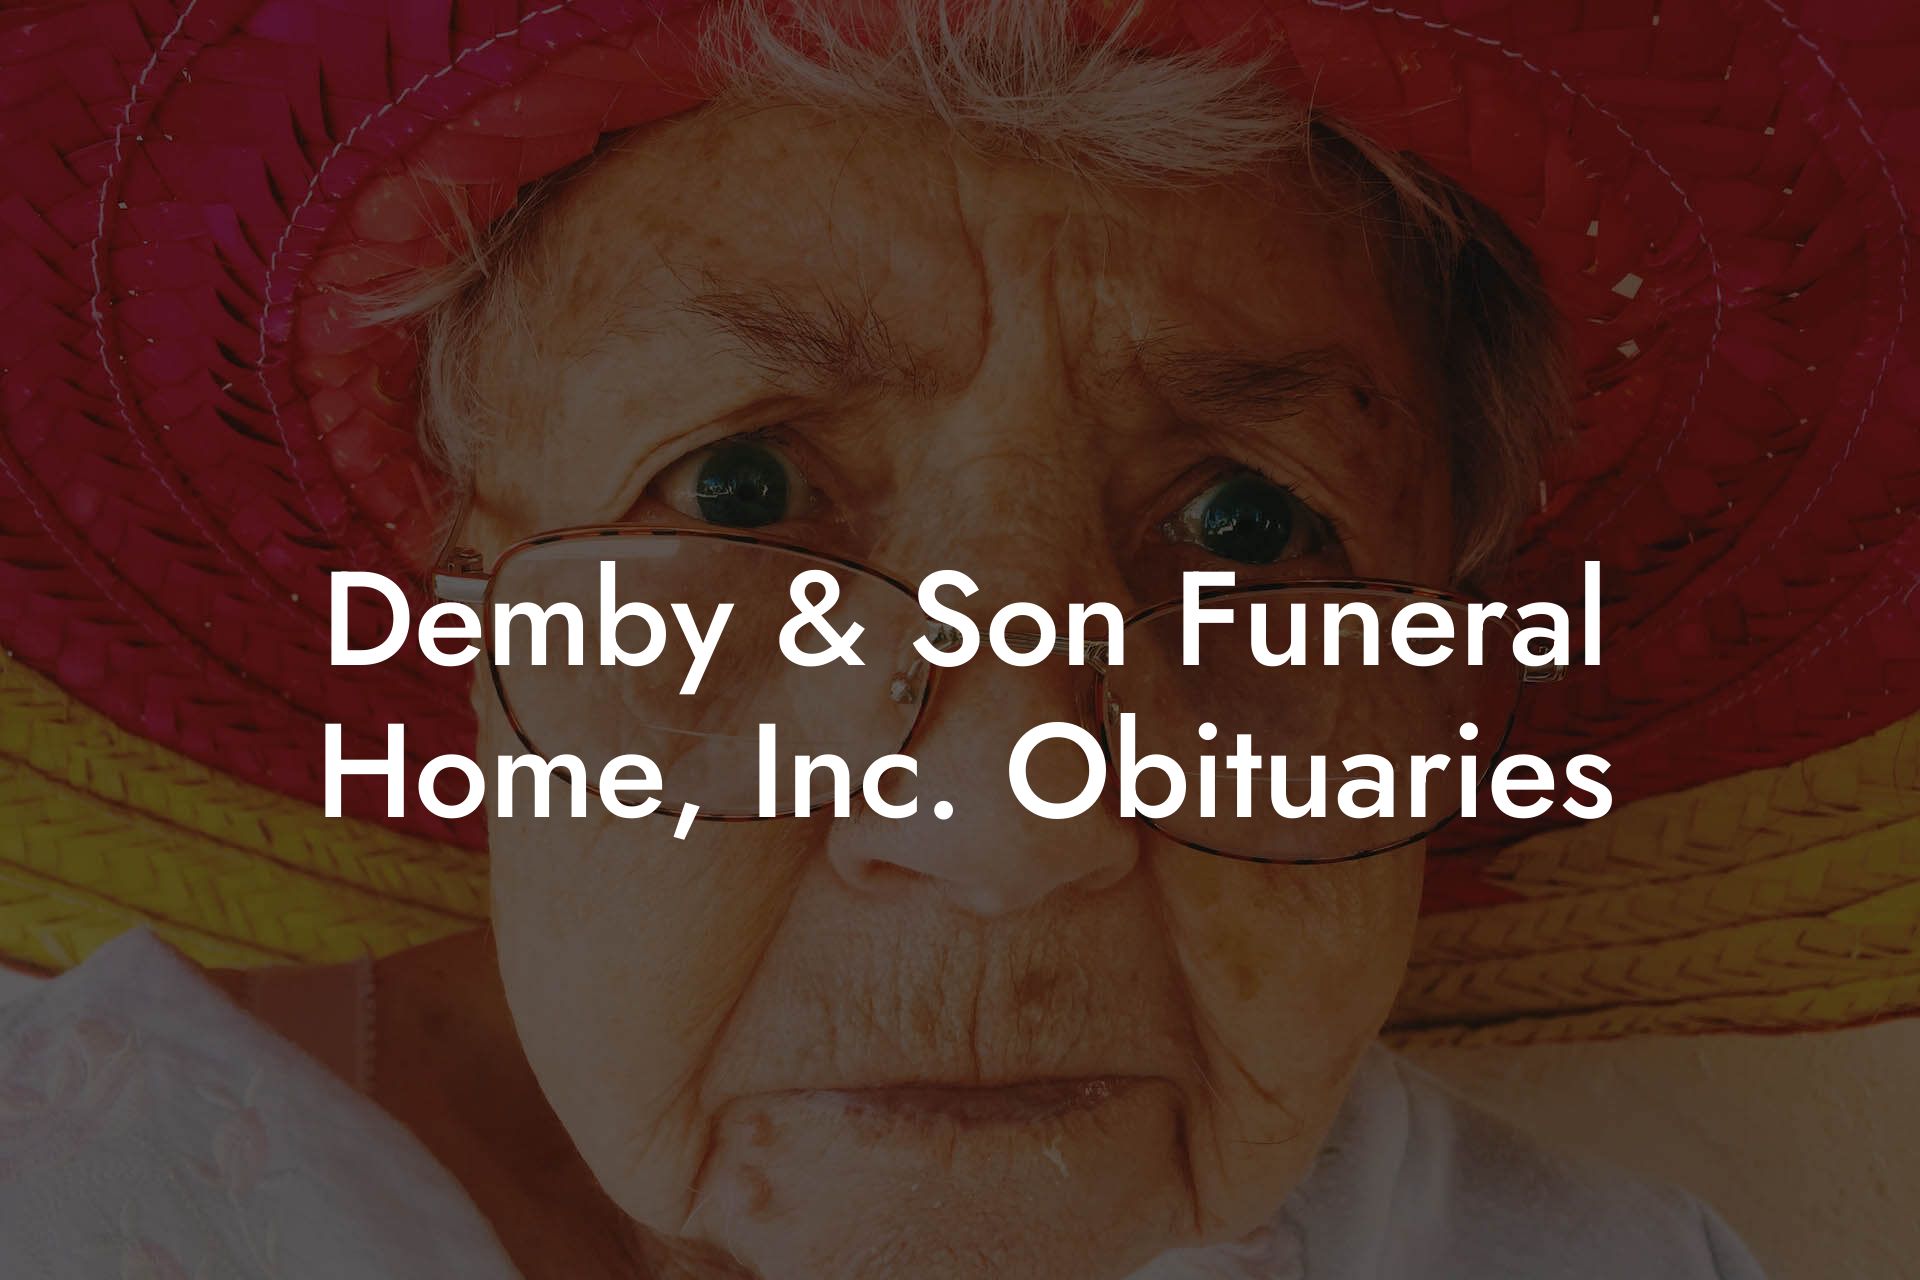 Demby & Son Funeral Home, Inc. Obituaries